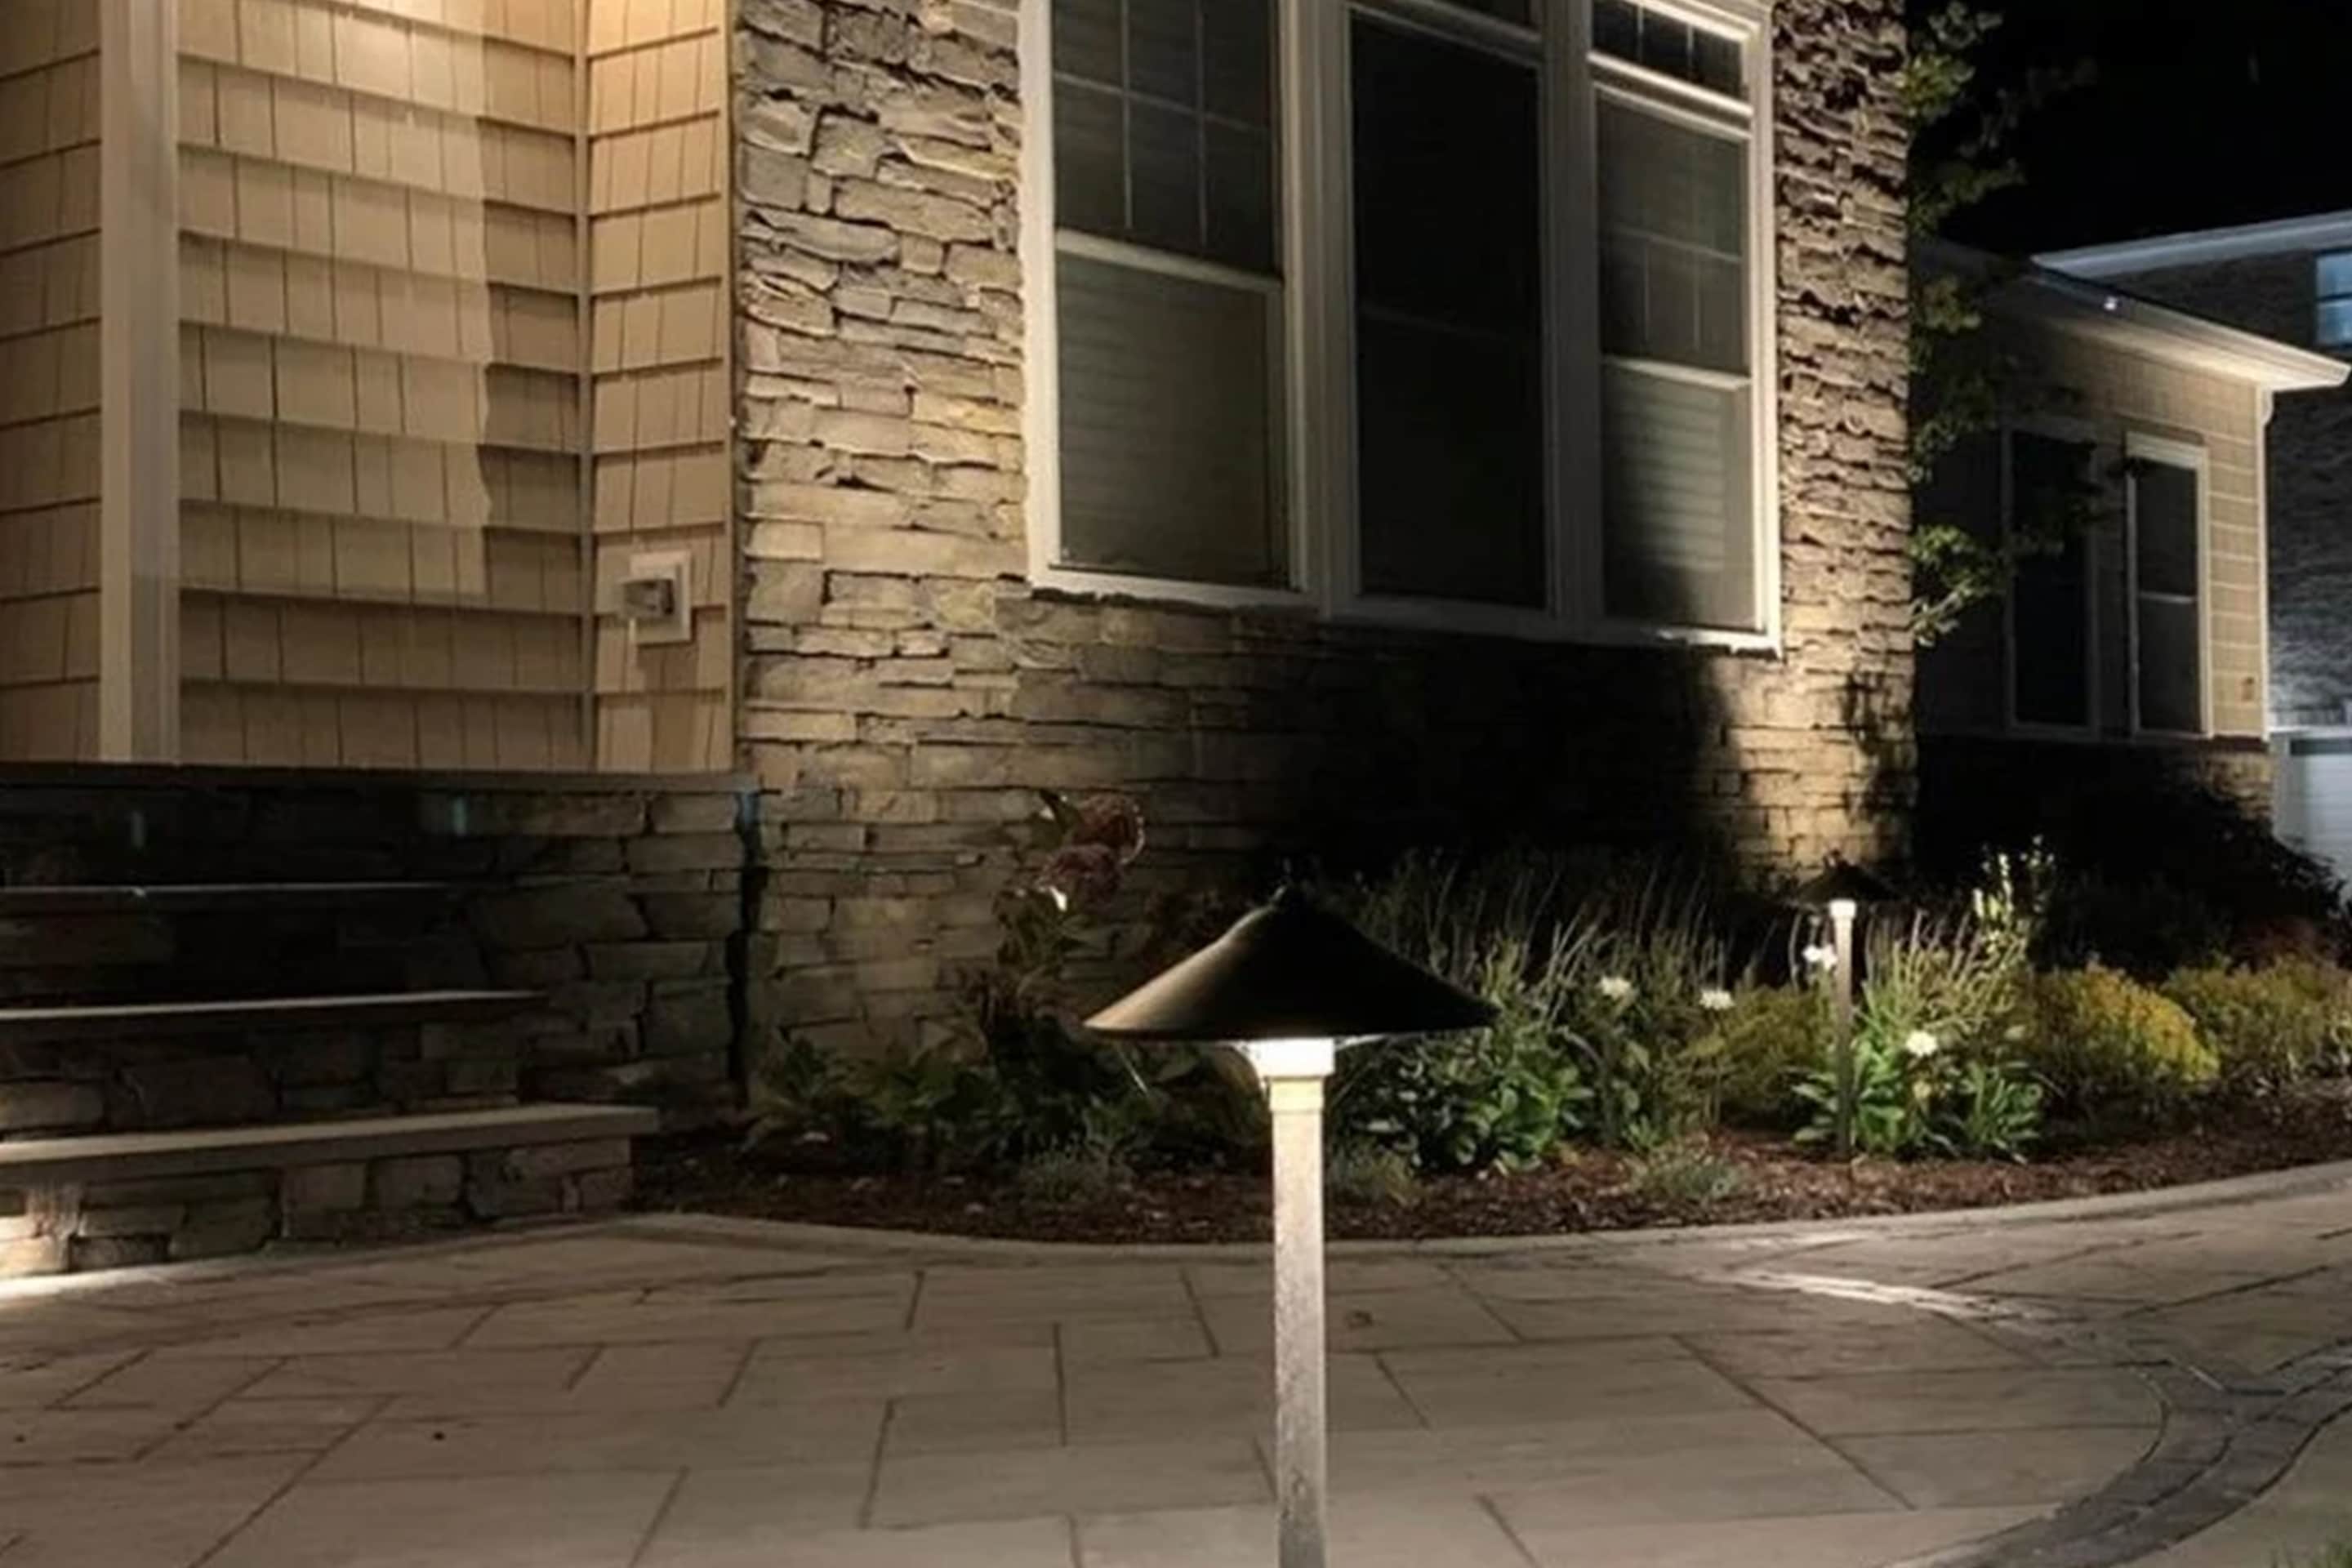 A sample of Vision Landscape Services hardscape design - first floor exterior view of a house with stone work illuminated and walkway lights